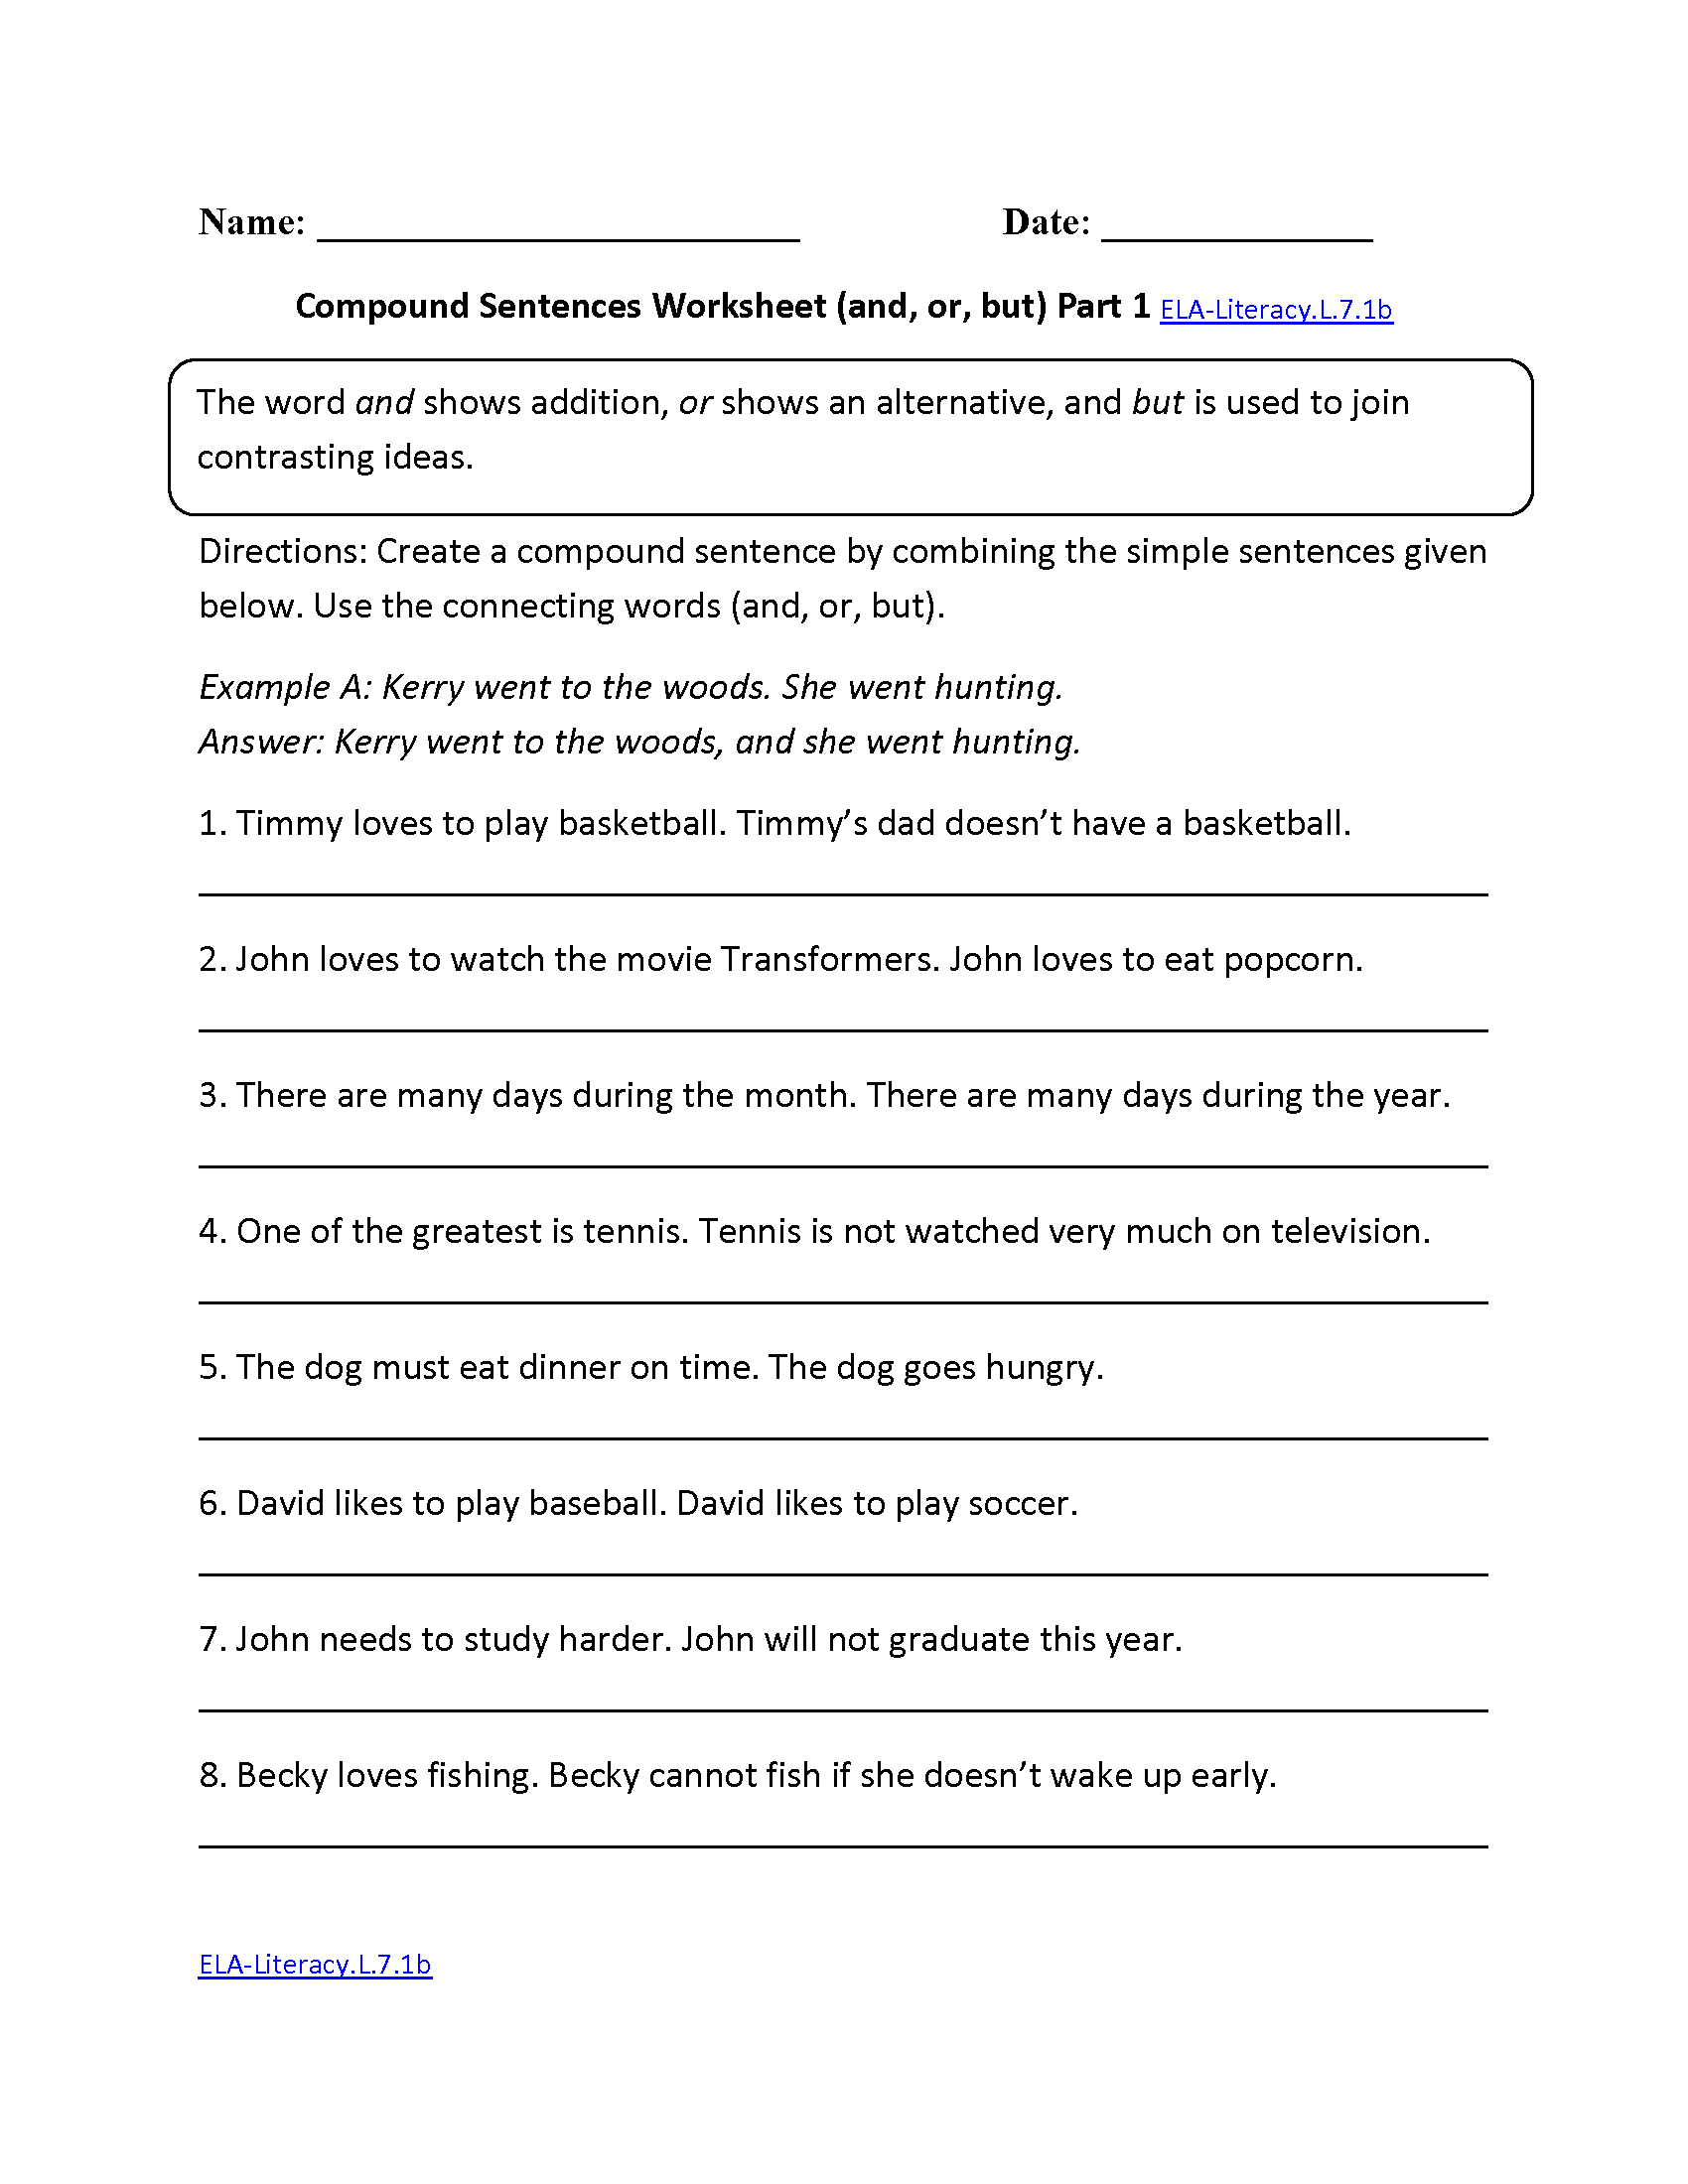 Compound Sentences Worksheet With Answers For Class 7 Kidsworksheetfun